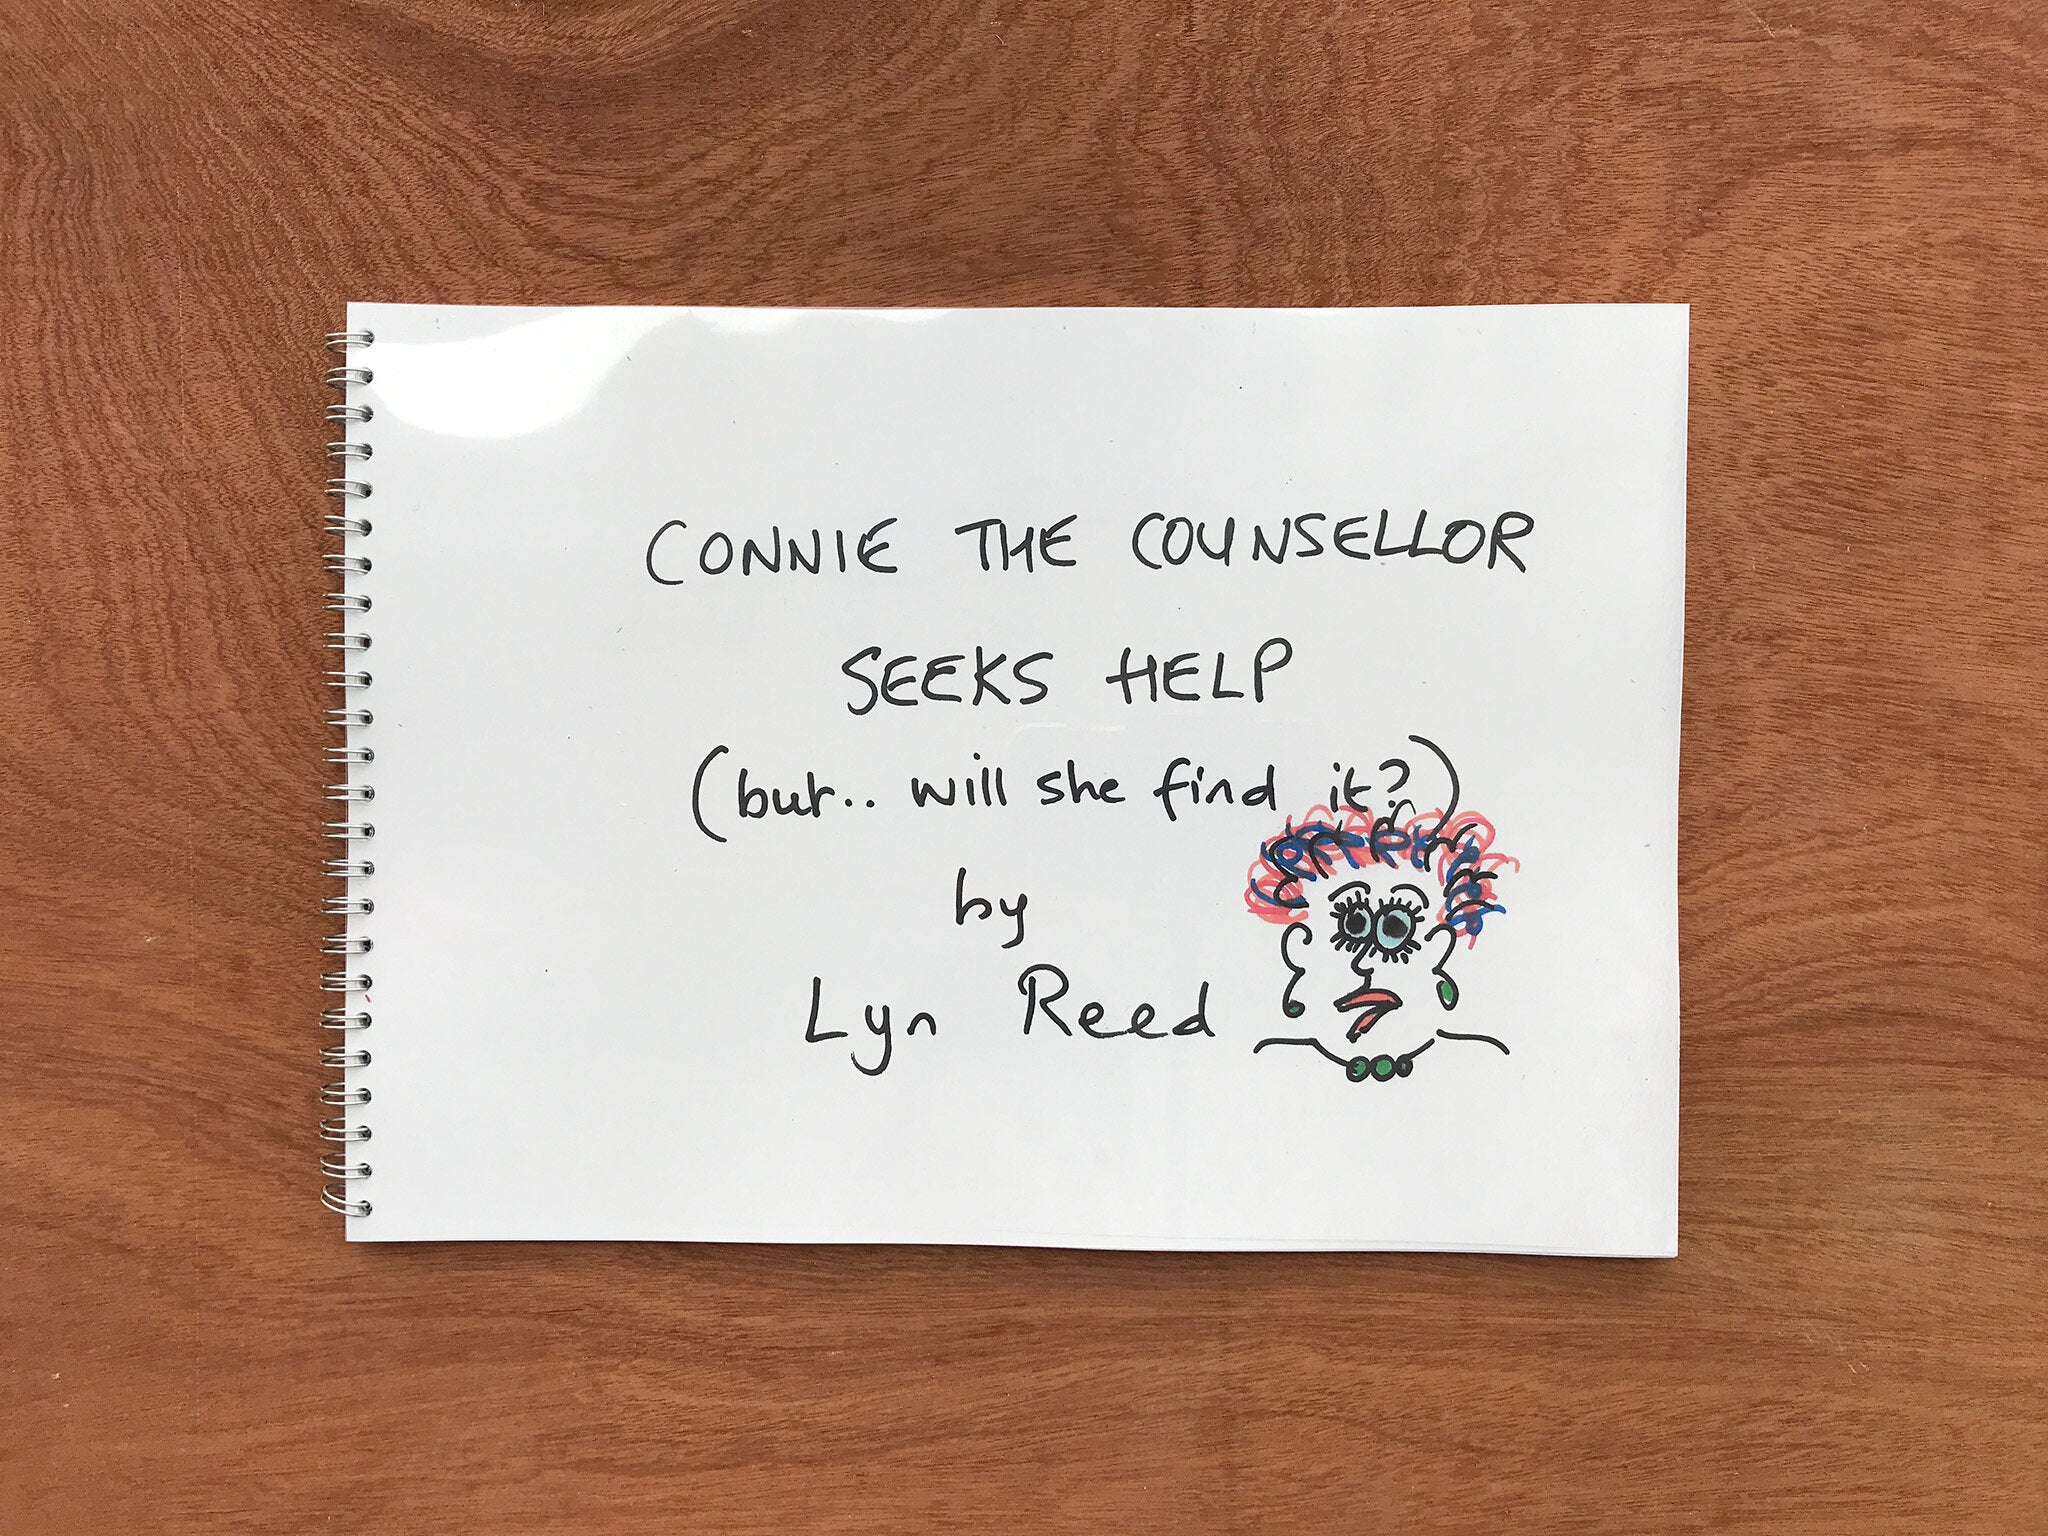 CONNIE THE COUNSELLOR by Lyn Reed